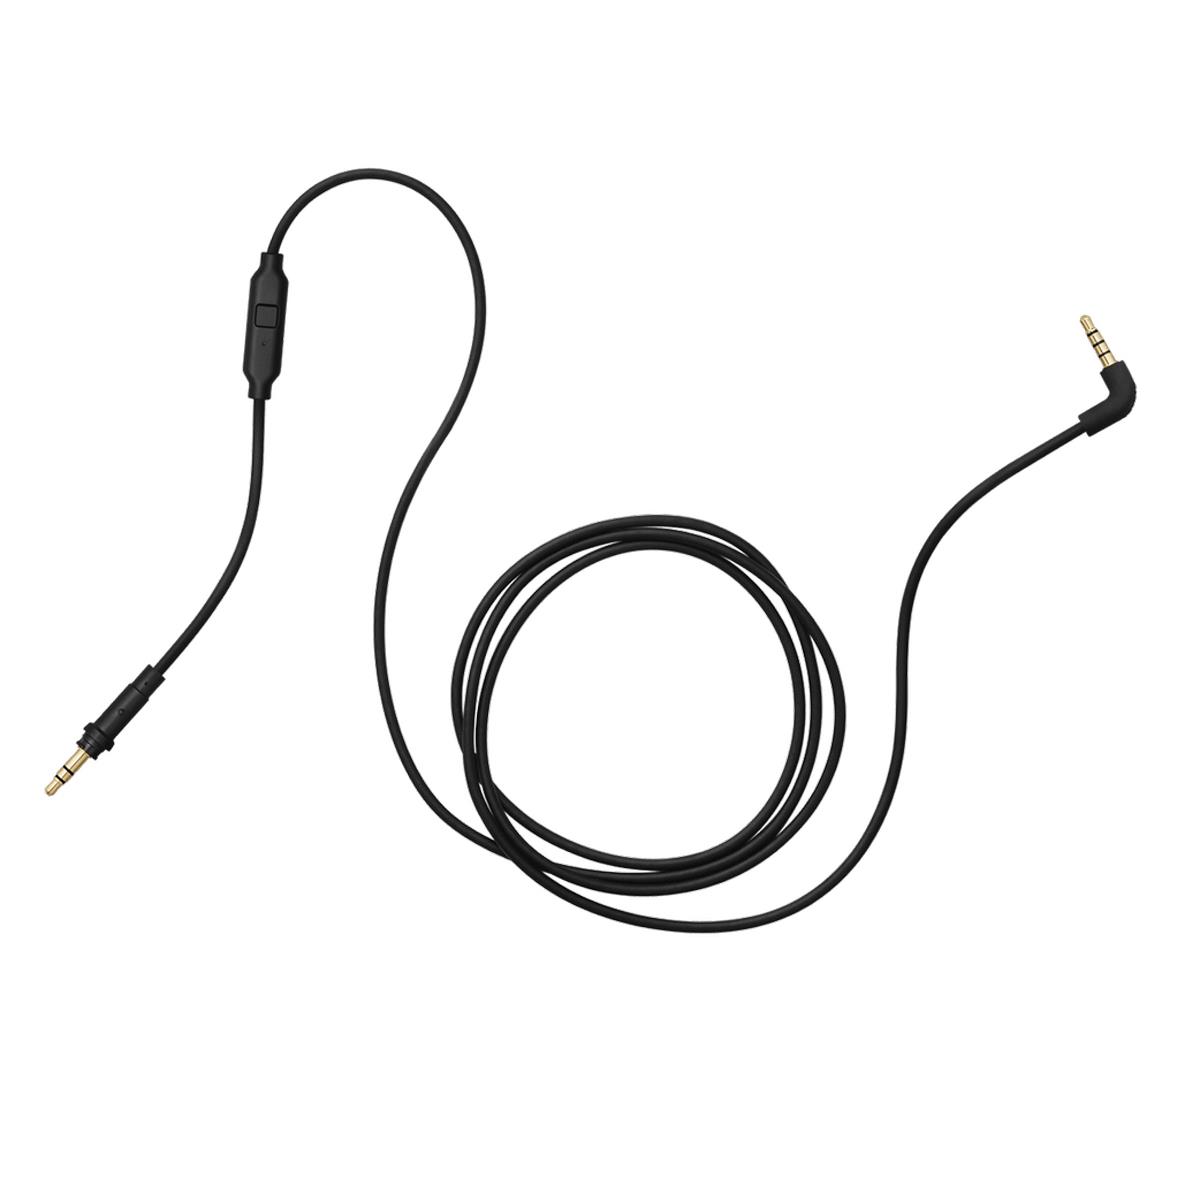 Photos - Other Sound & Hi-Fi AIAIAI C01 3.93' Straight Cable w/One Button Remote and Inline Microphone, 